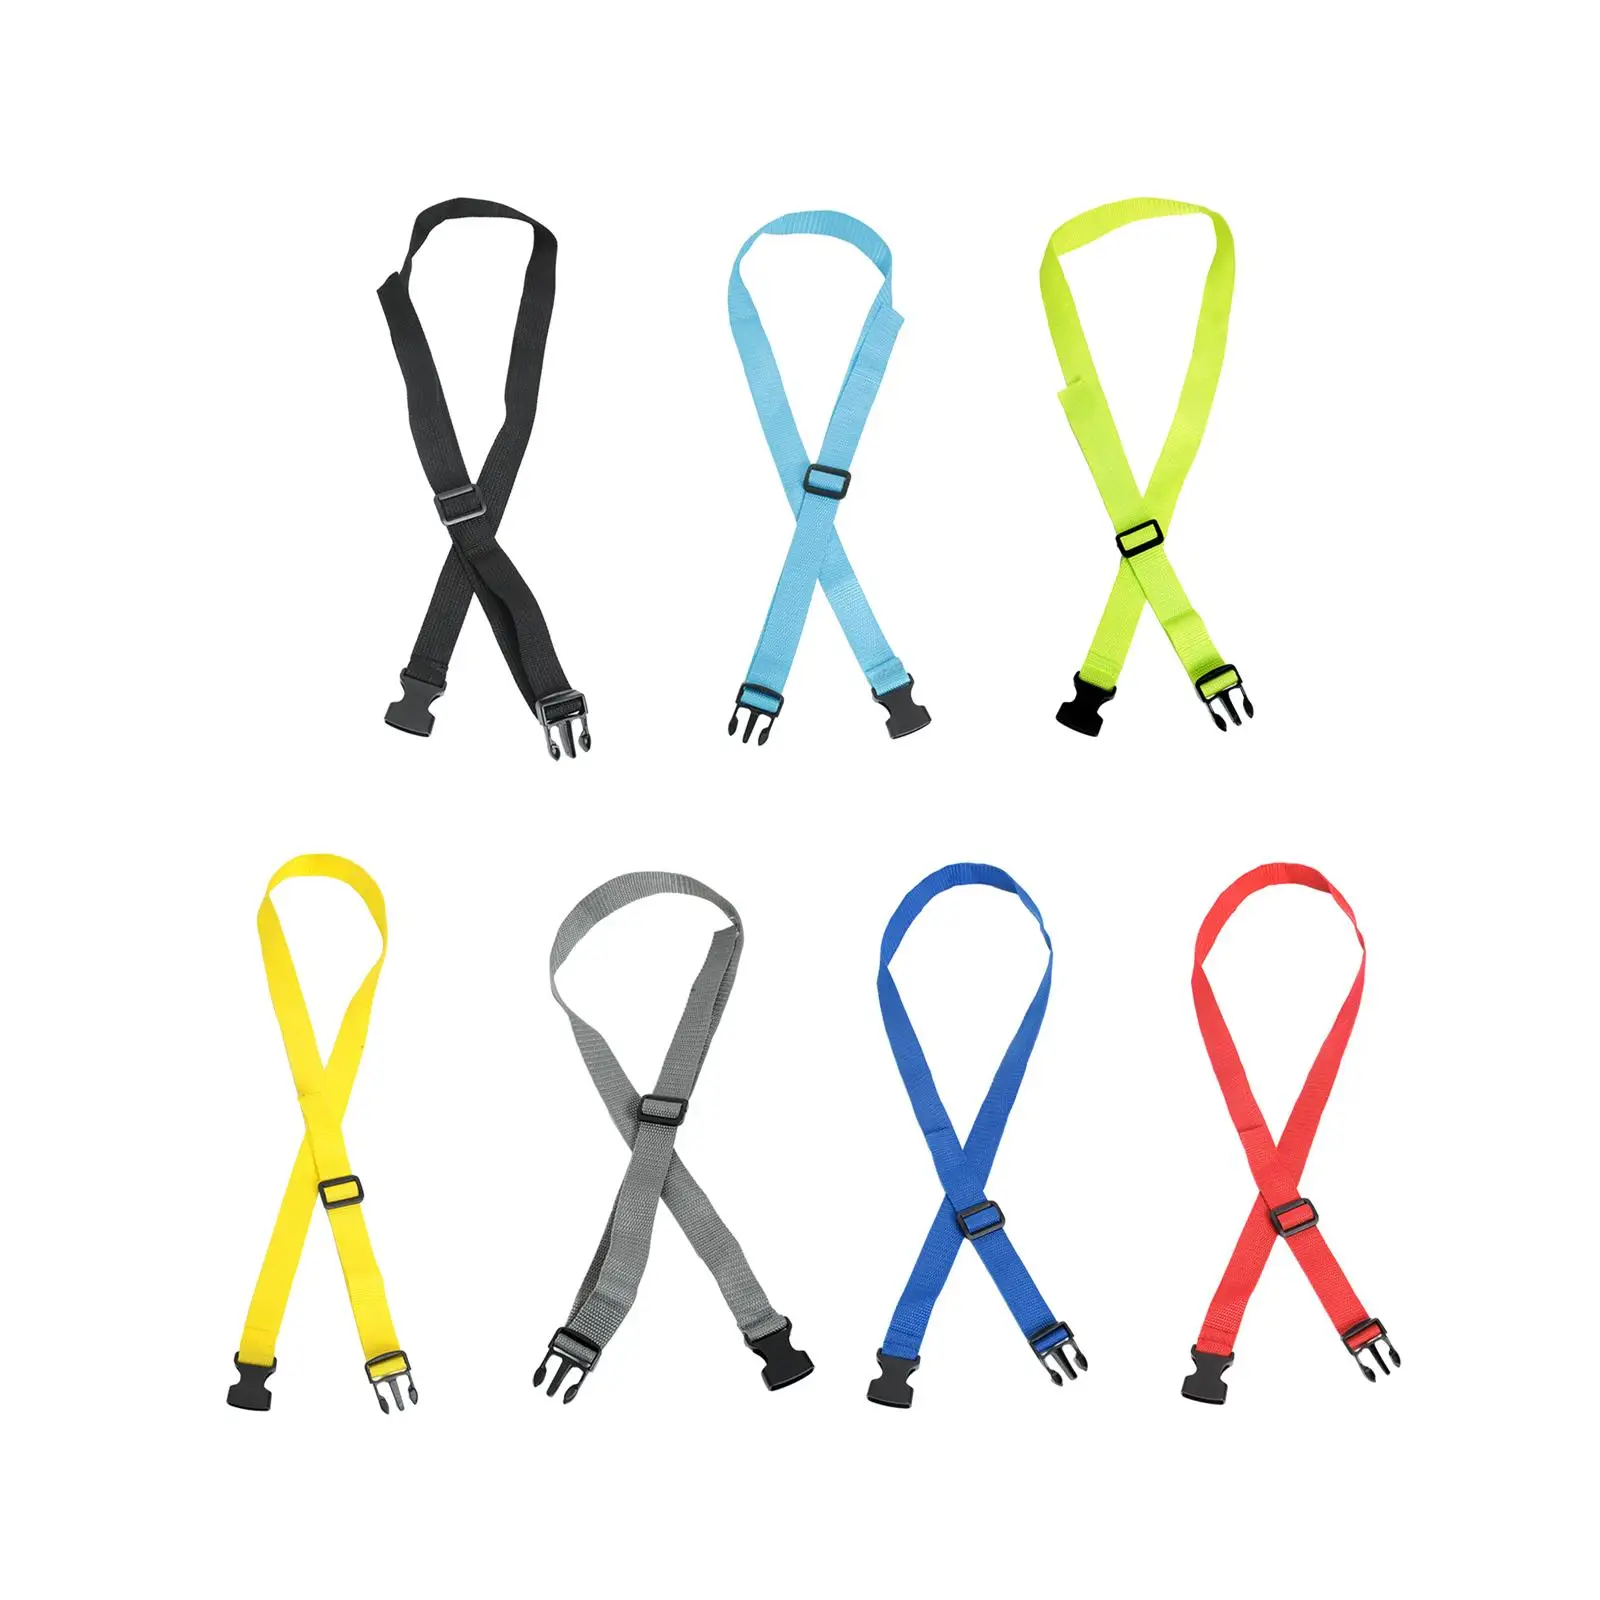 Pulp Board Binding Rope Surfboard Quick Storage Rope for Long Time Carrying Stand up Paddleboard Surfboard Paddle Board Carrying